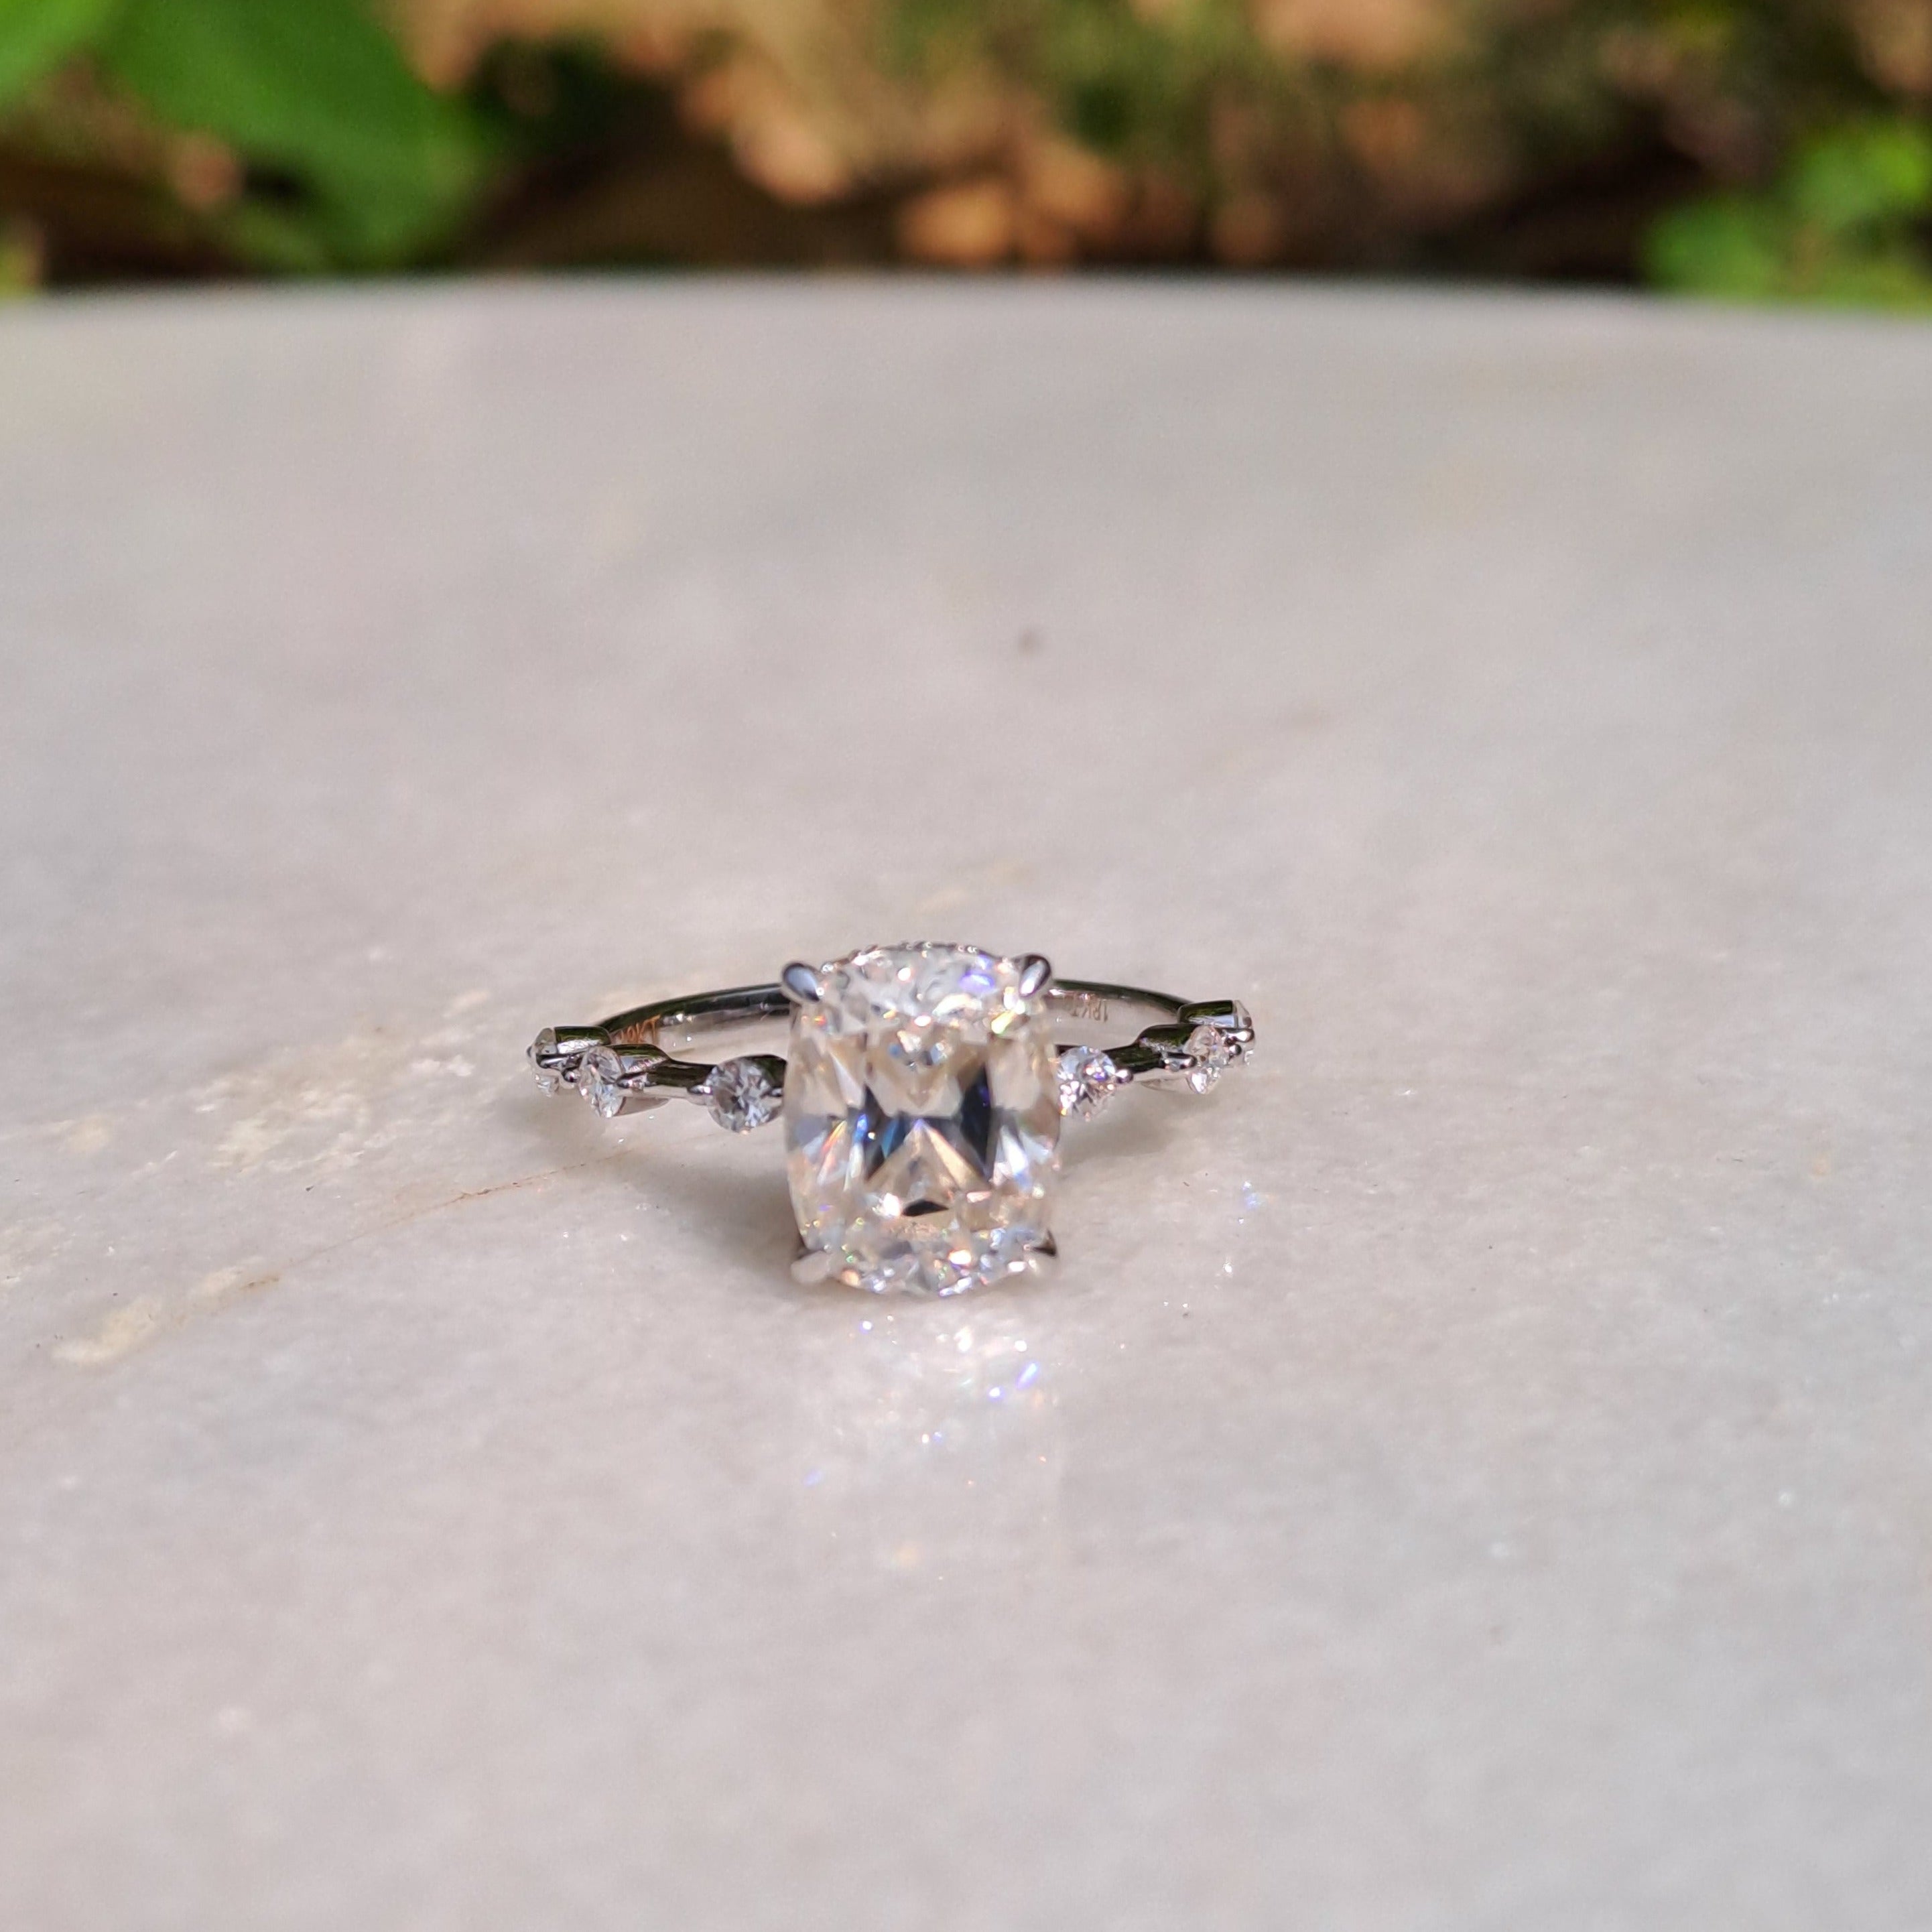 Buy Oval Moissanite Engagement Ring, Rose Gold Three Stone Ring, Moissanite Diamond  Wedding Ring, Vow Renewal Ring, Oval Diamond Love Band Ring Online in India  … | Vintage engagement rings unique, Diamond